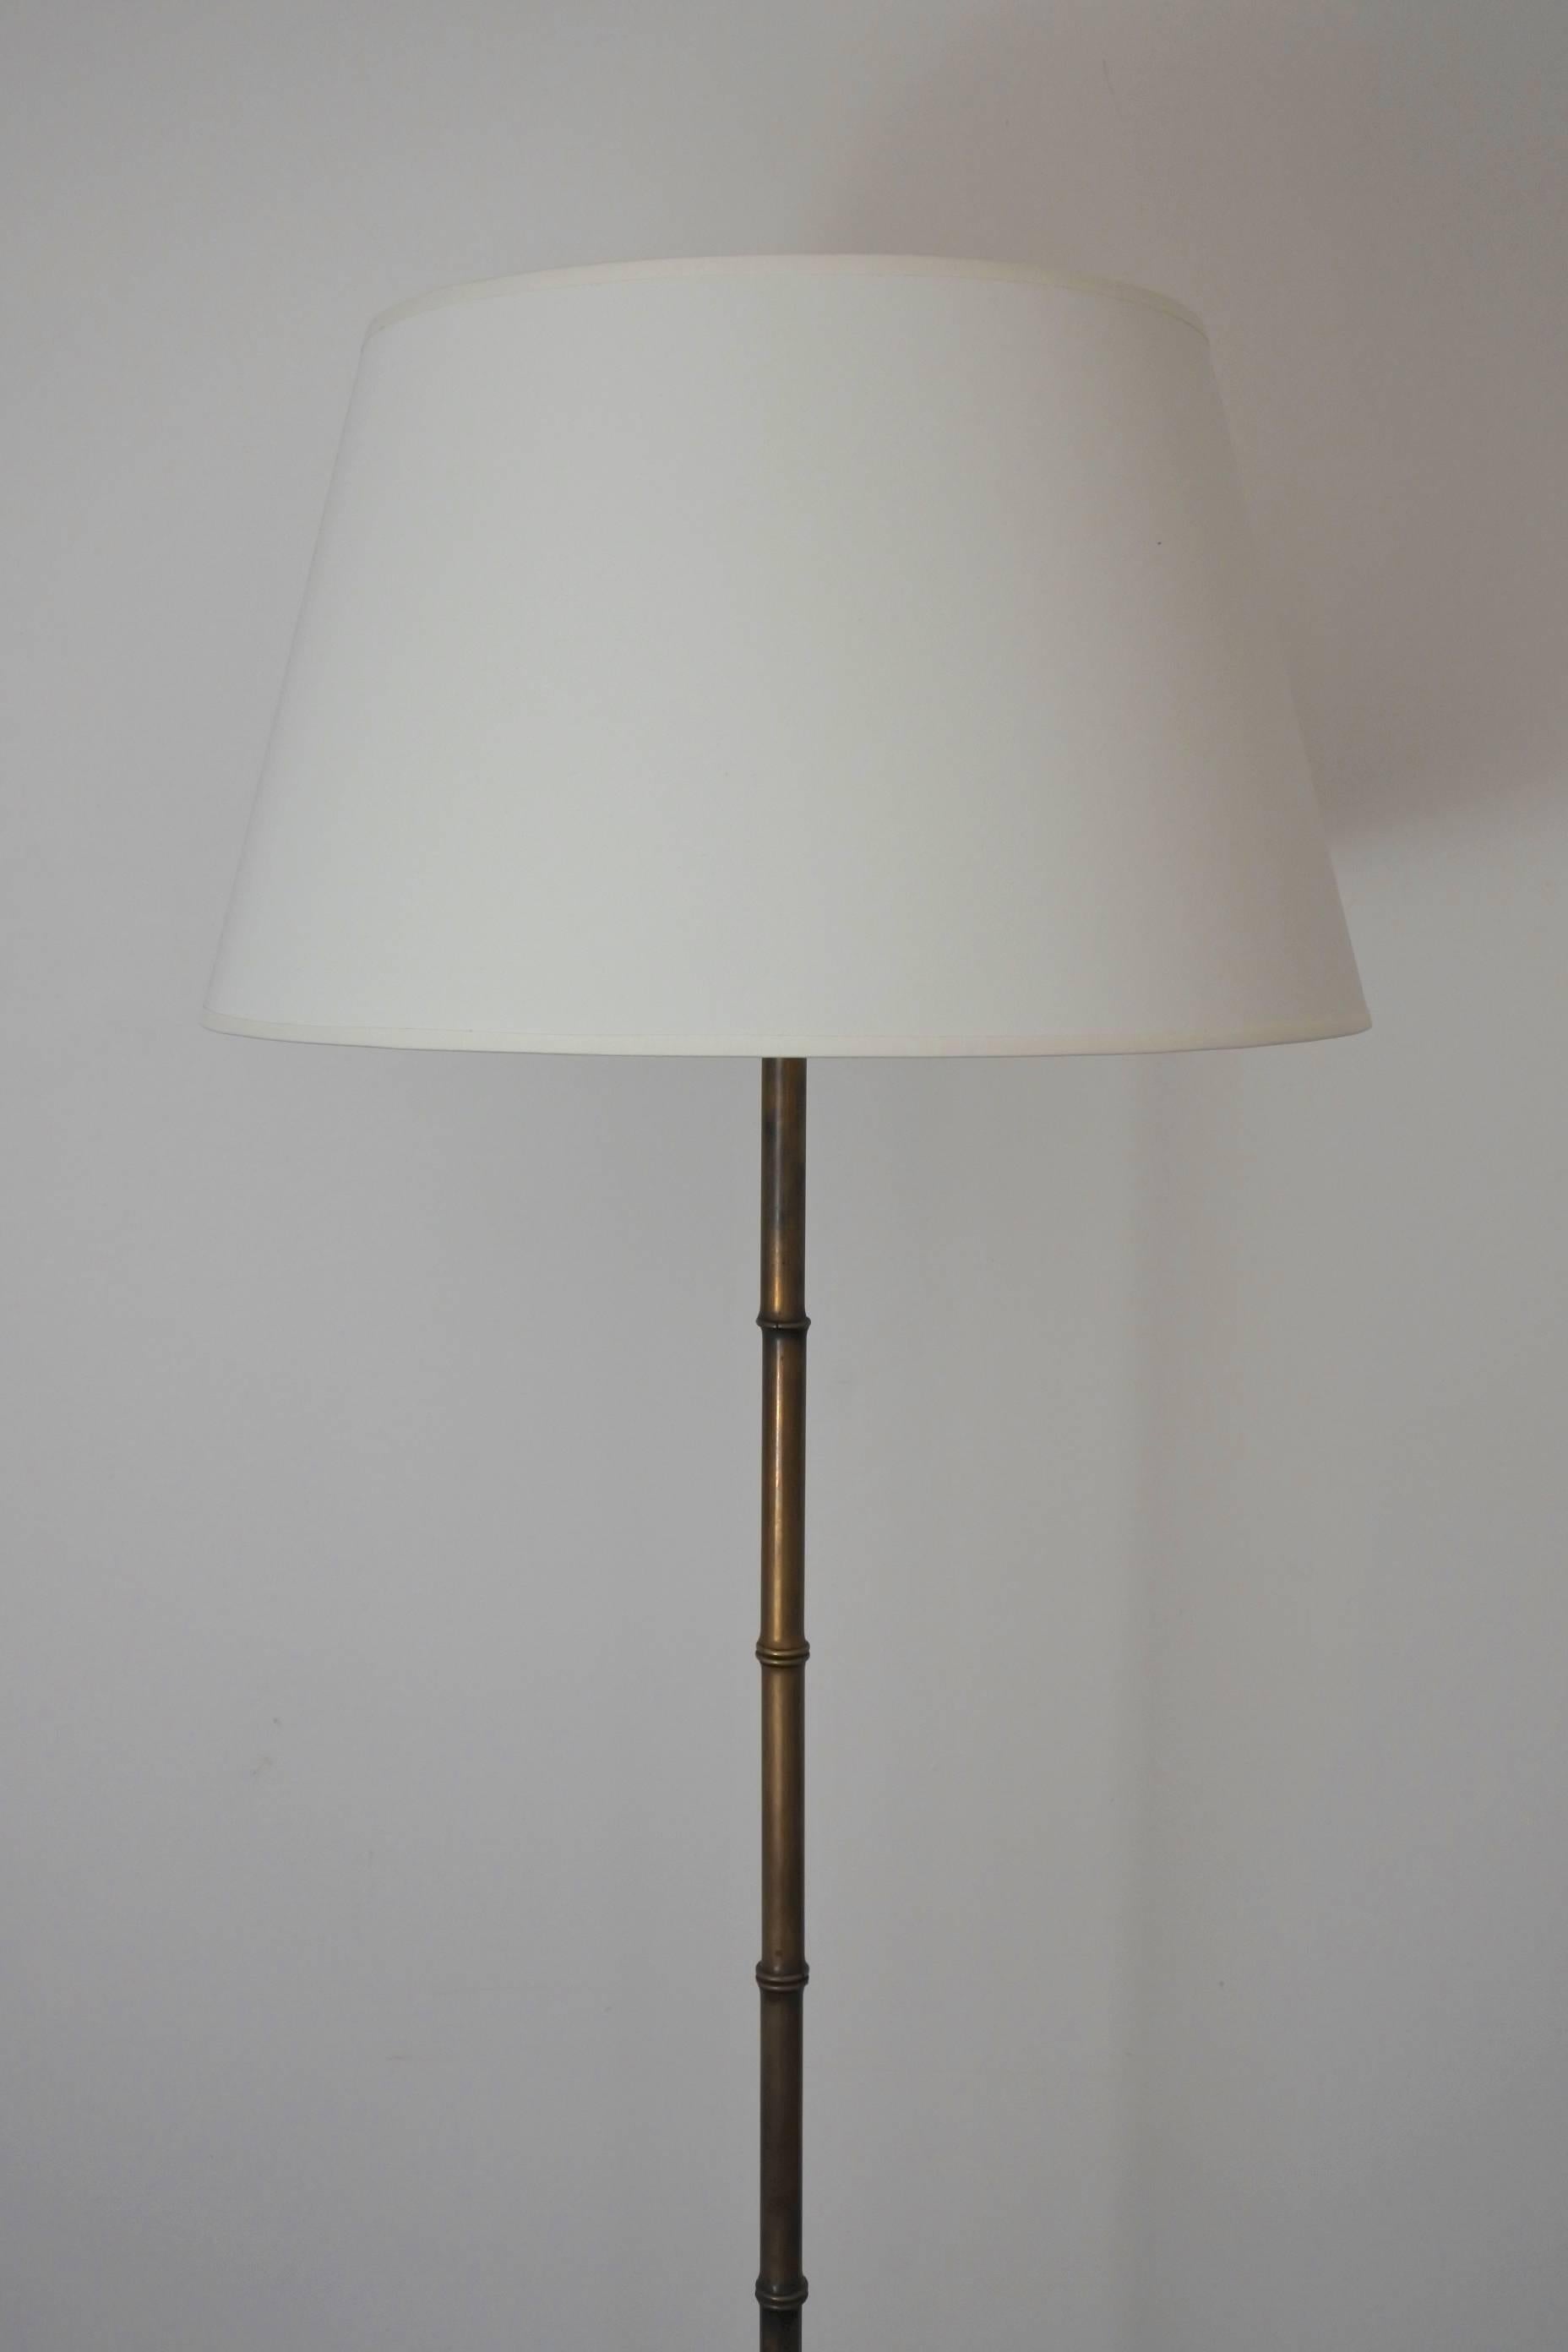 Midcentury faux bamboo floor lamp by french designer Jacques Adnet.
Solid brass stem, tripod base in forged iron with brass accents,
circa 1950.
Height silk shade included 170 cm (67 inches).